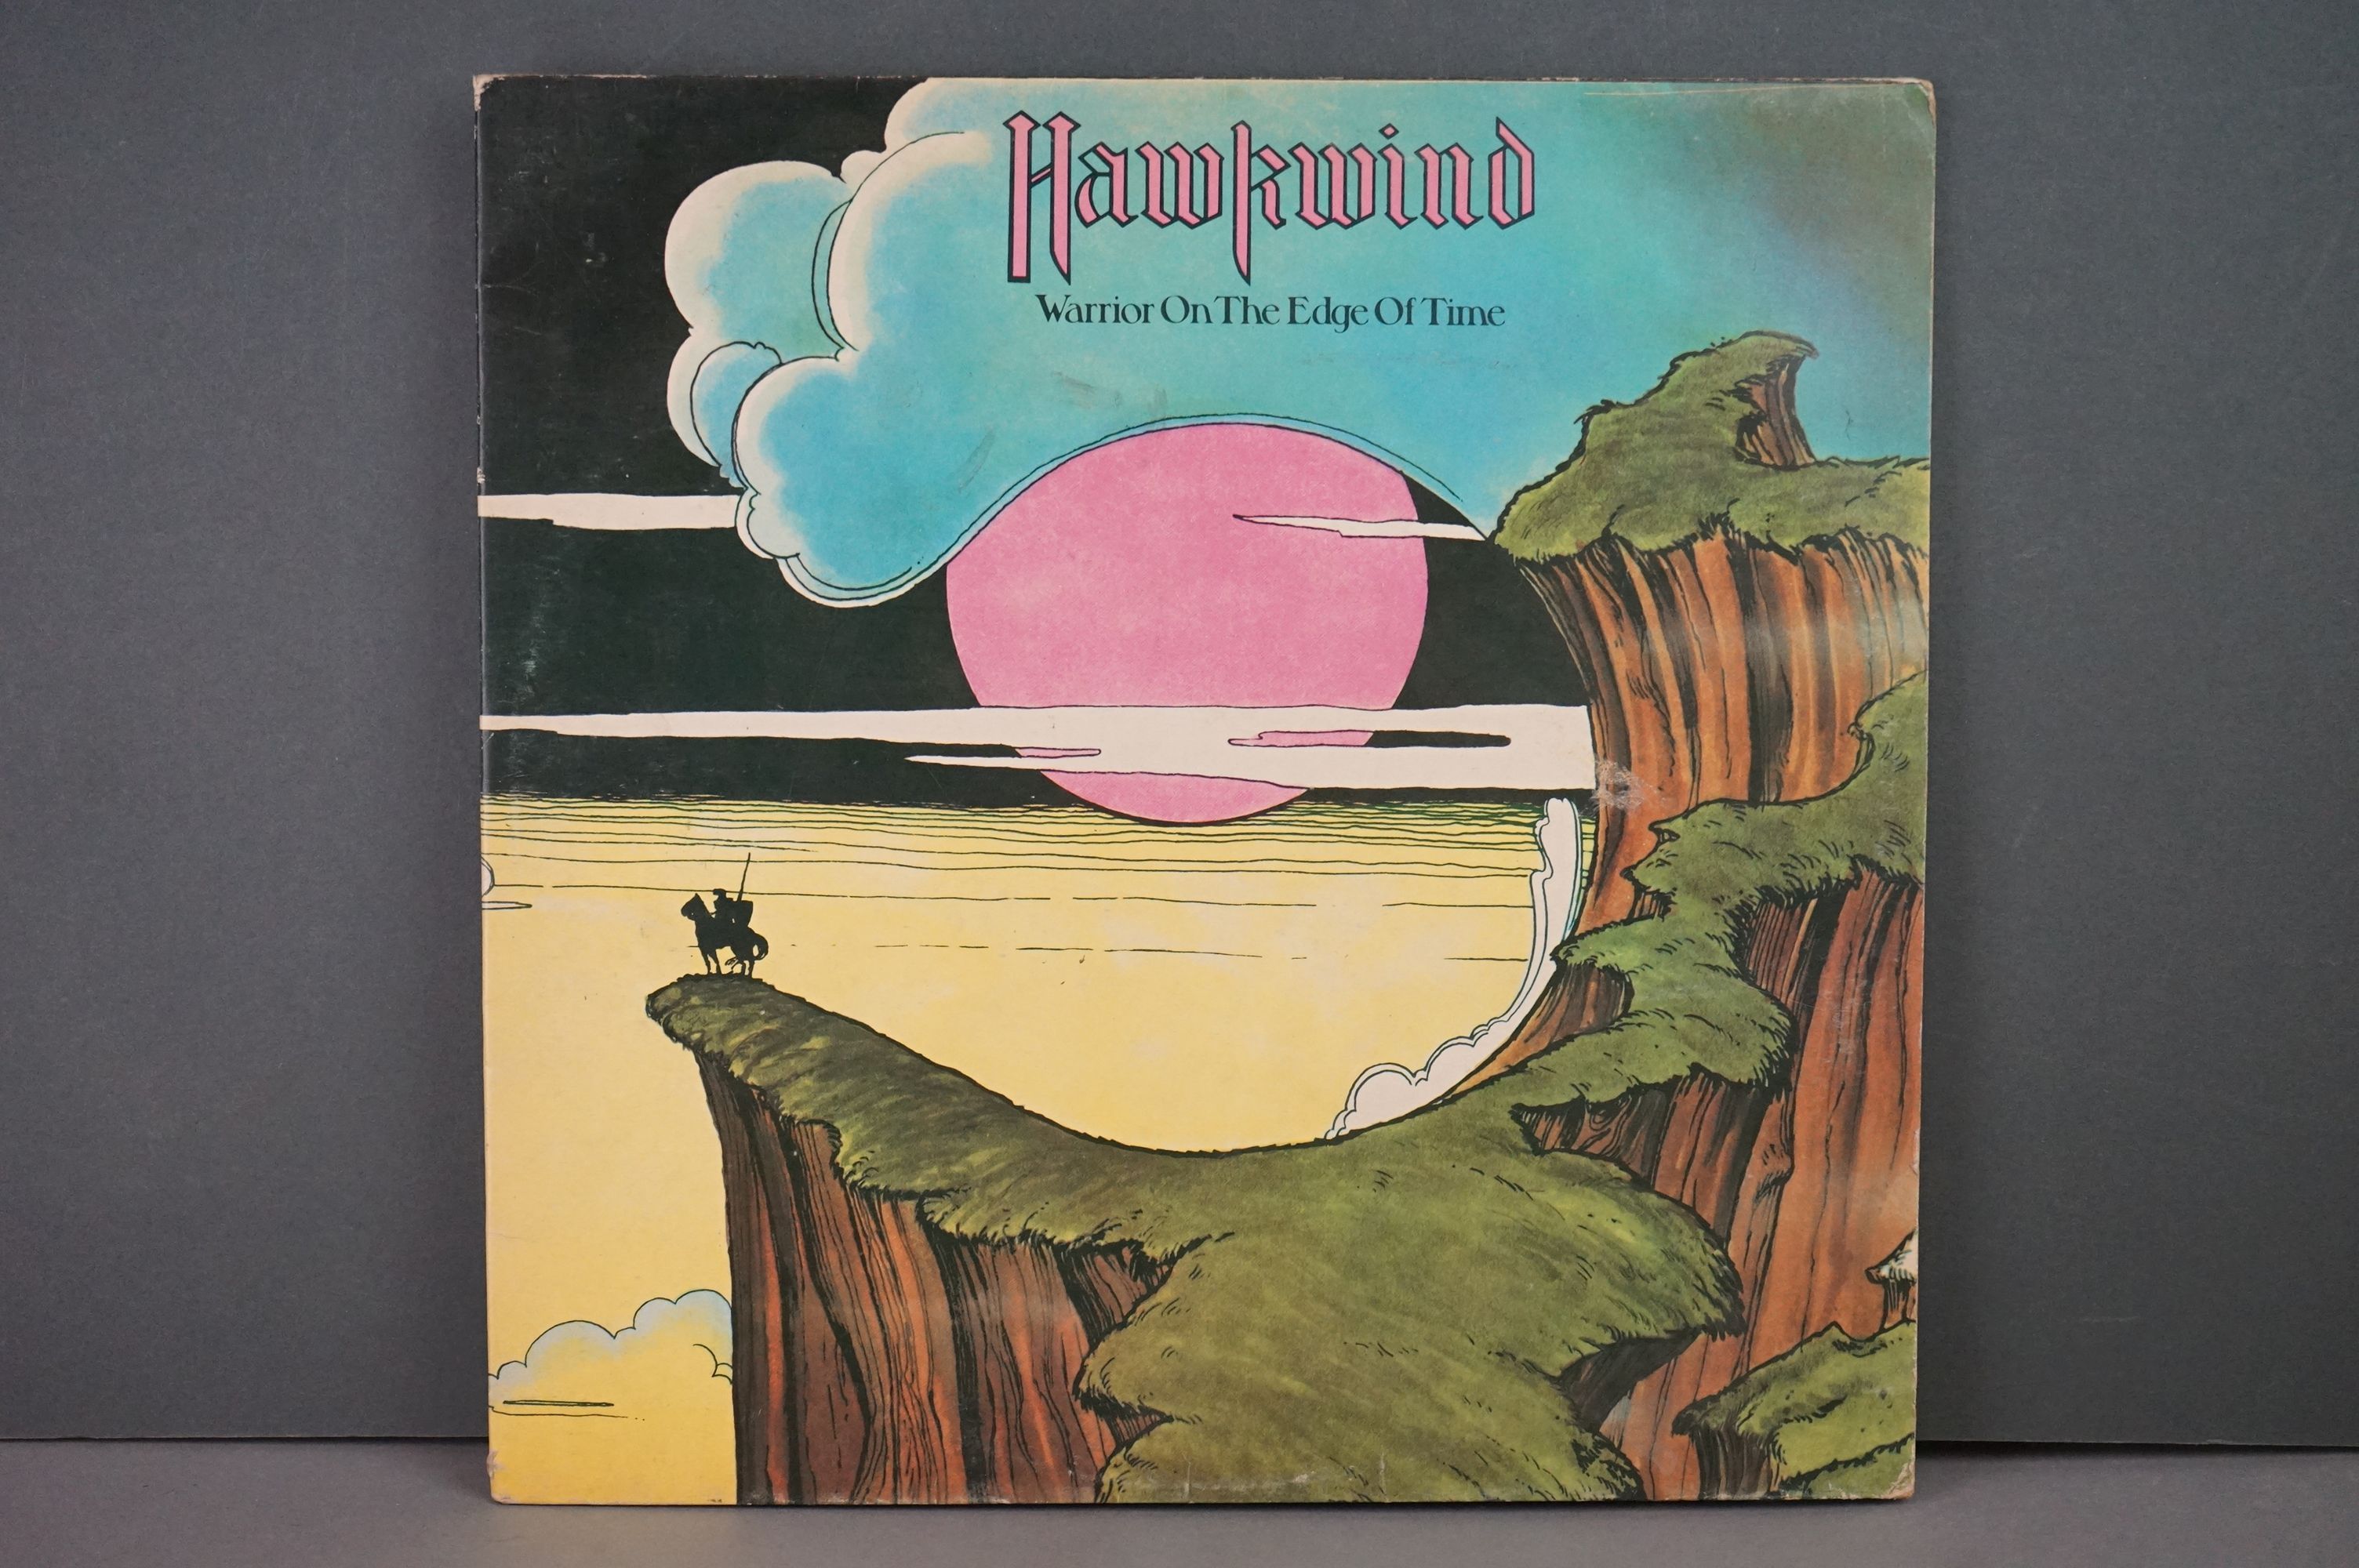 Vinyl - Hawkwind Warrior On The Edge Of Time (UAG 29766) complete with inner, gatefold intact.